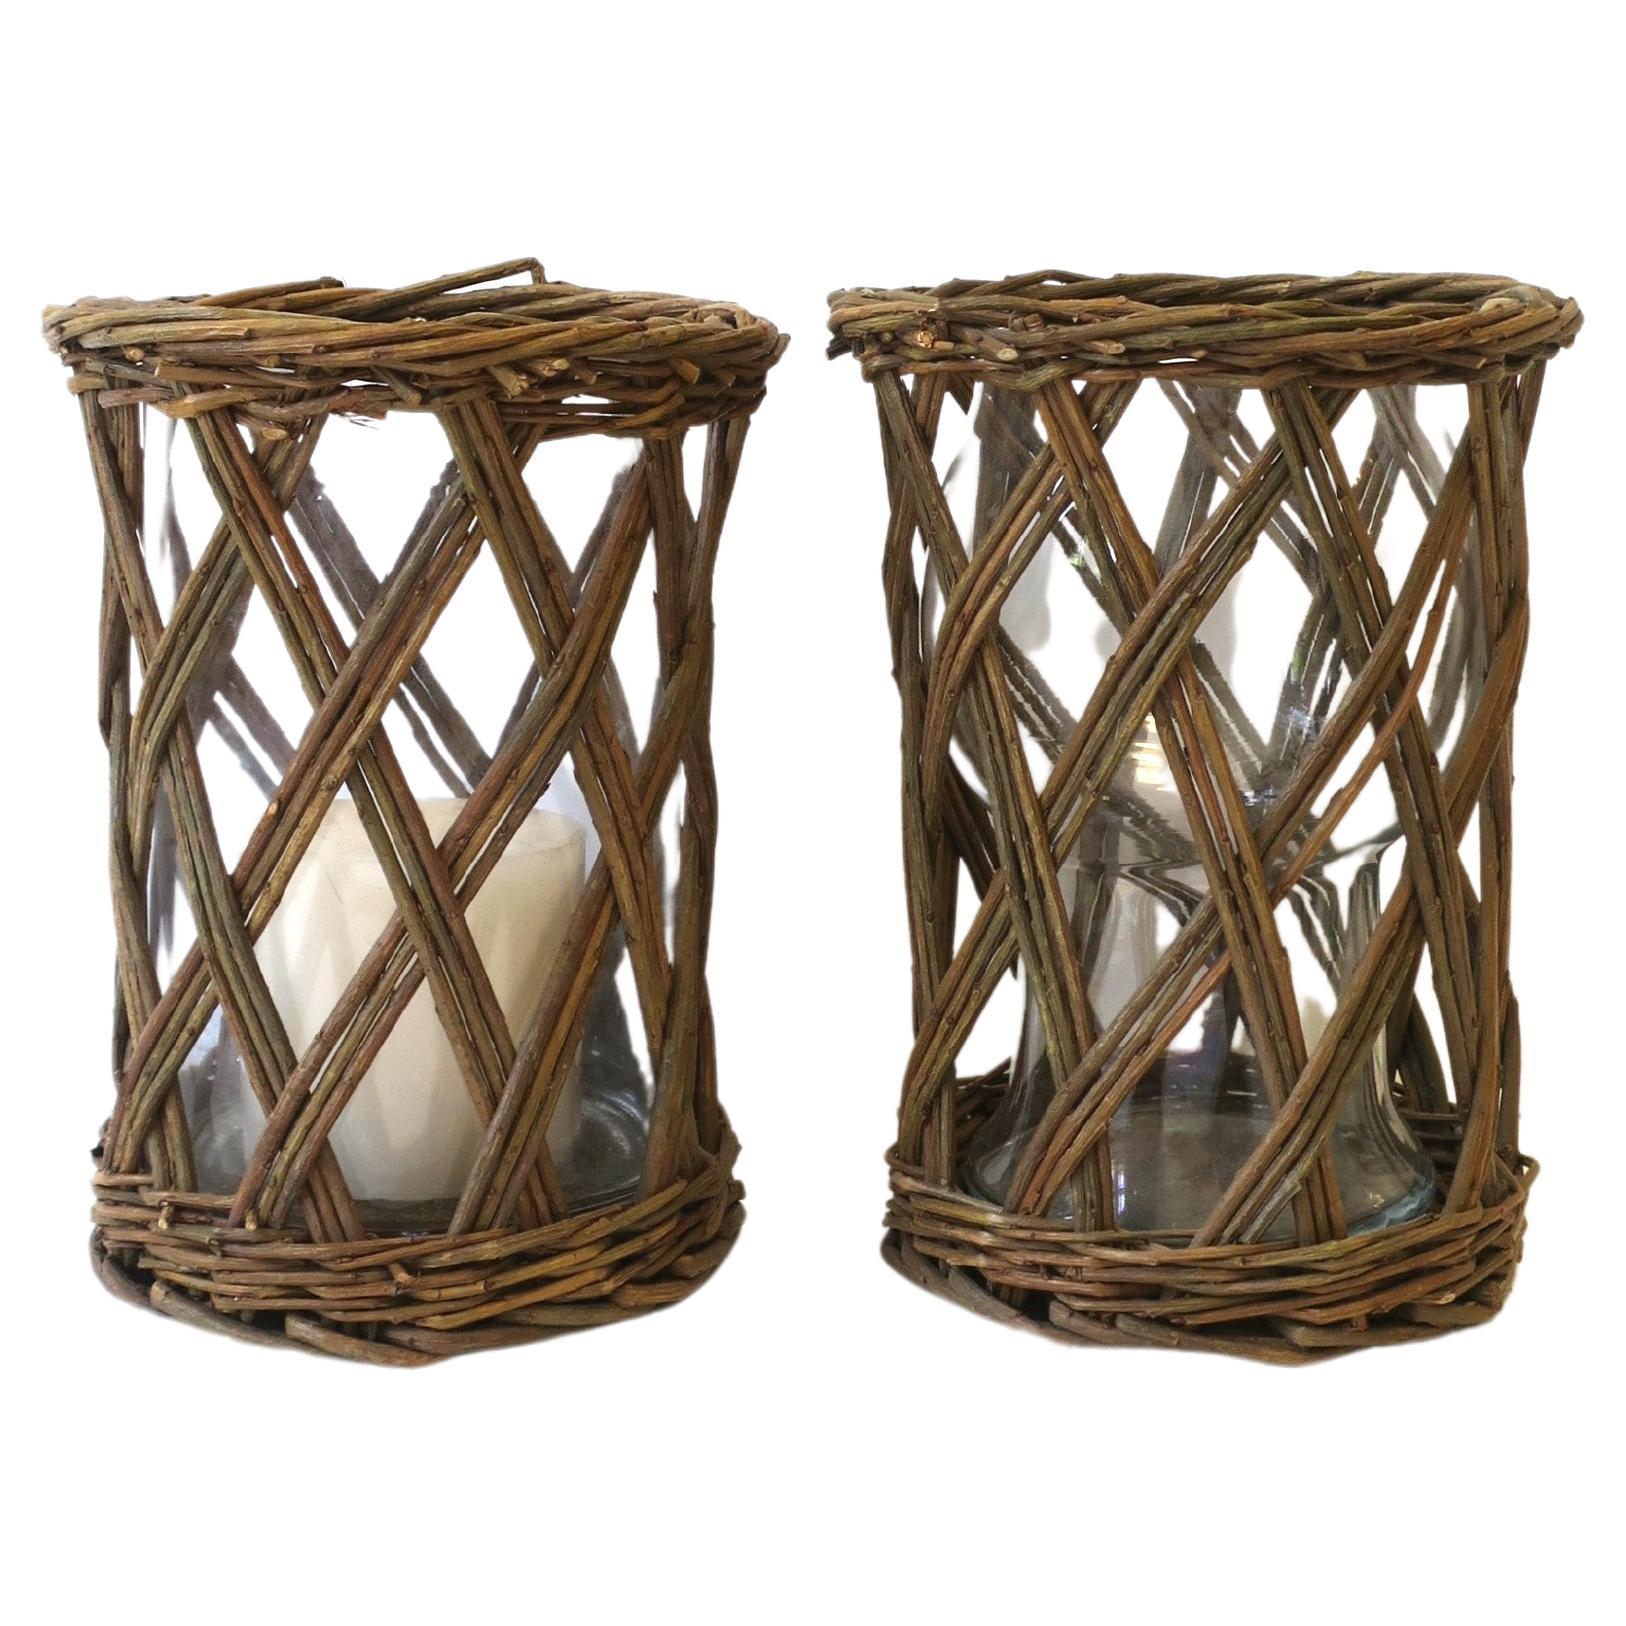 Wicker Hurrican Candle Lamps, Pair